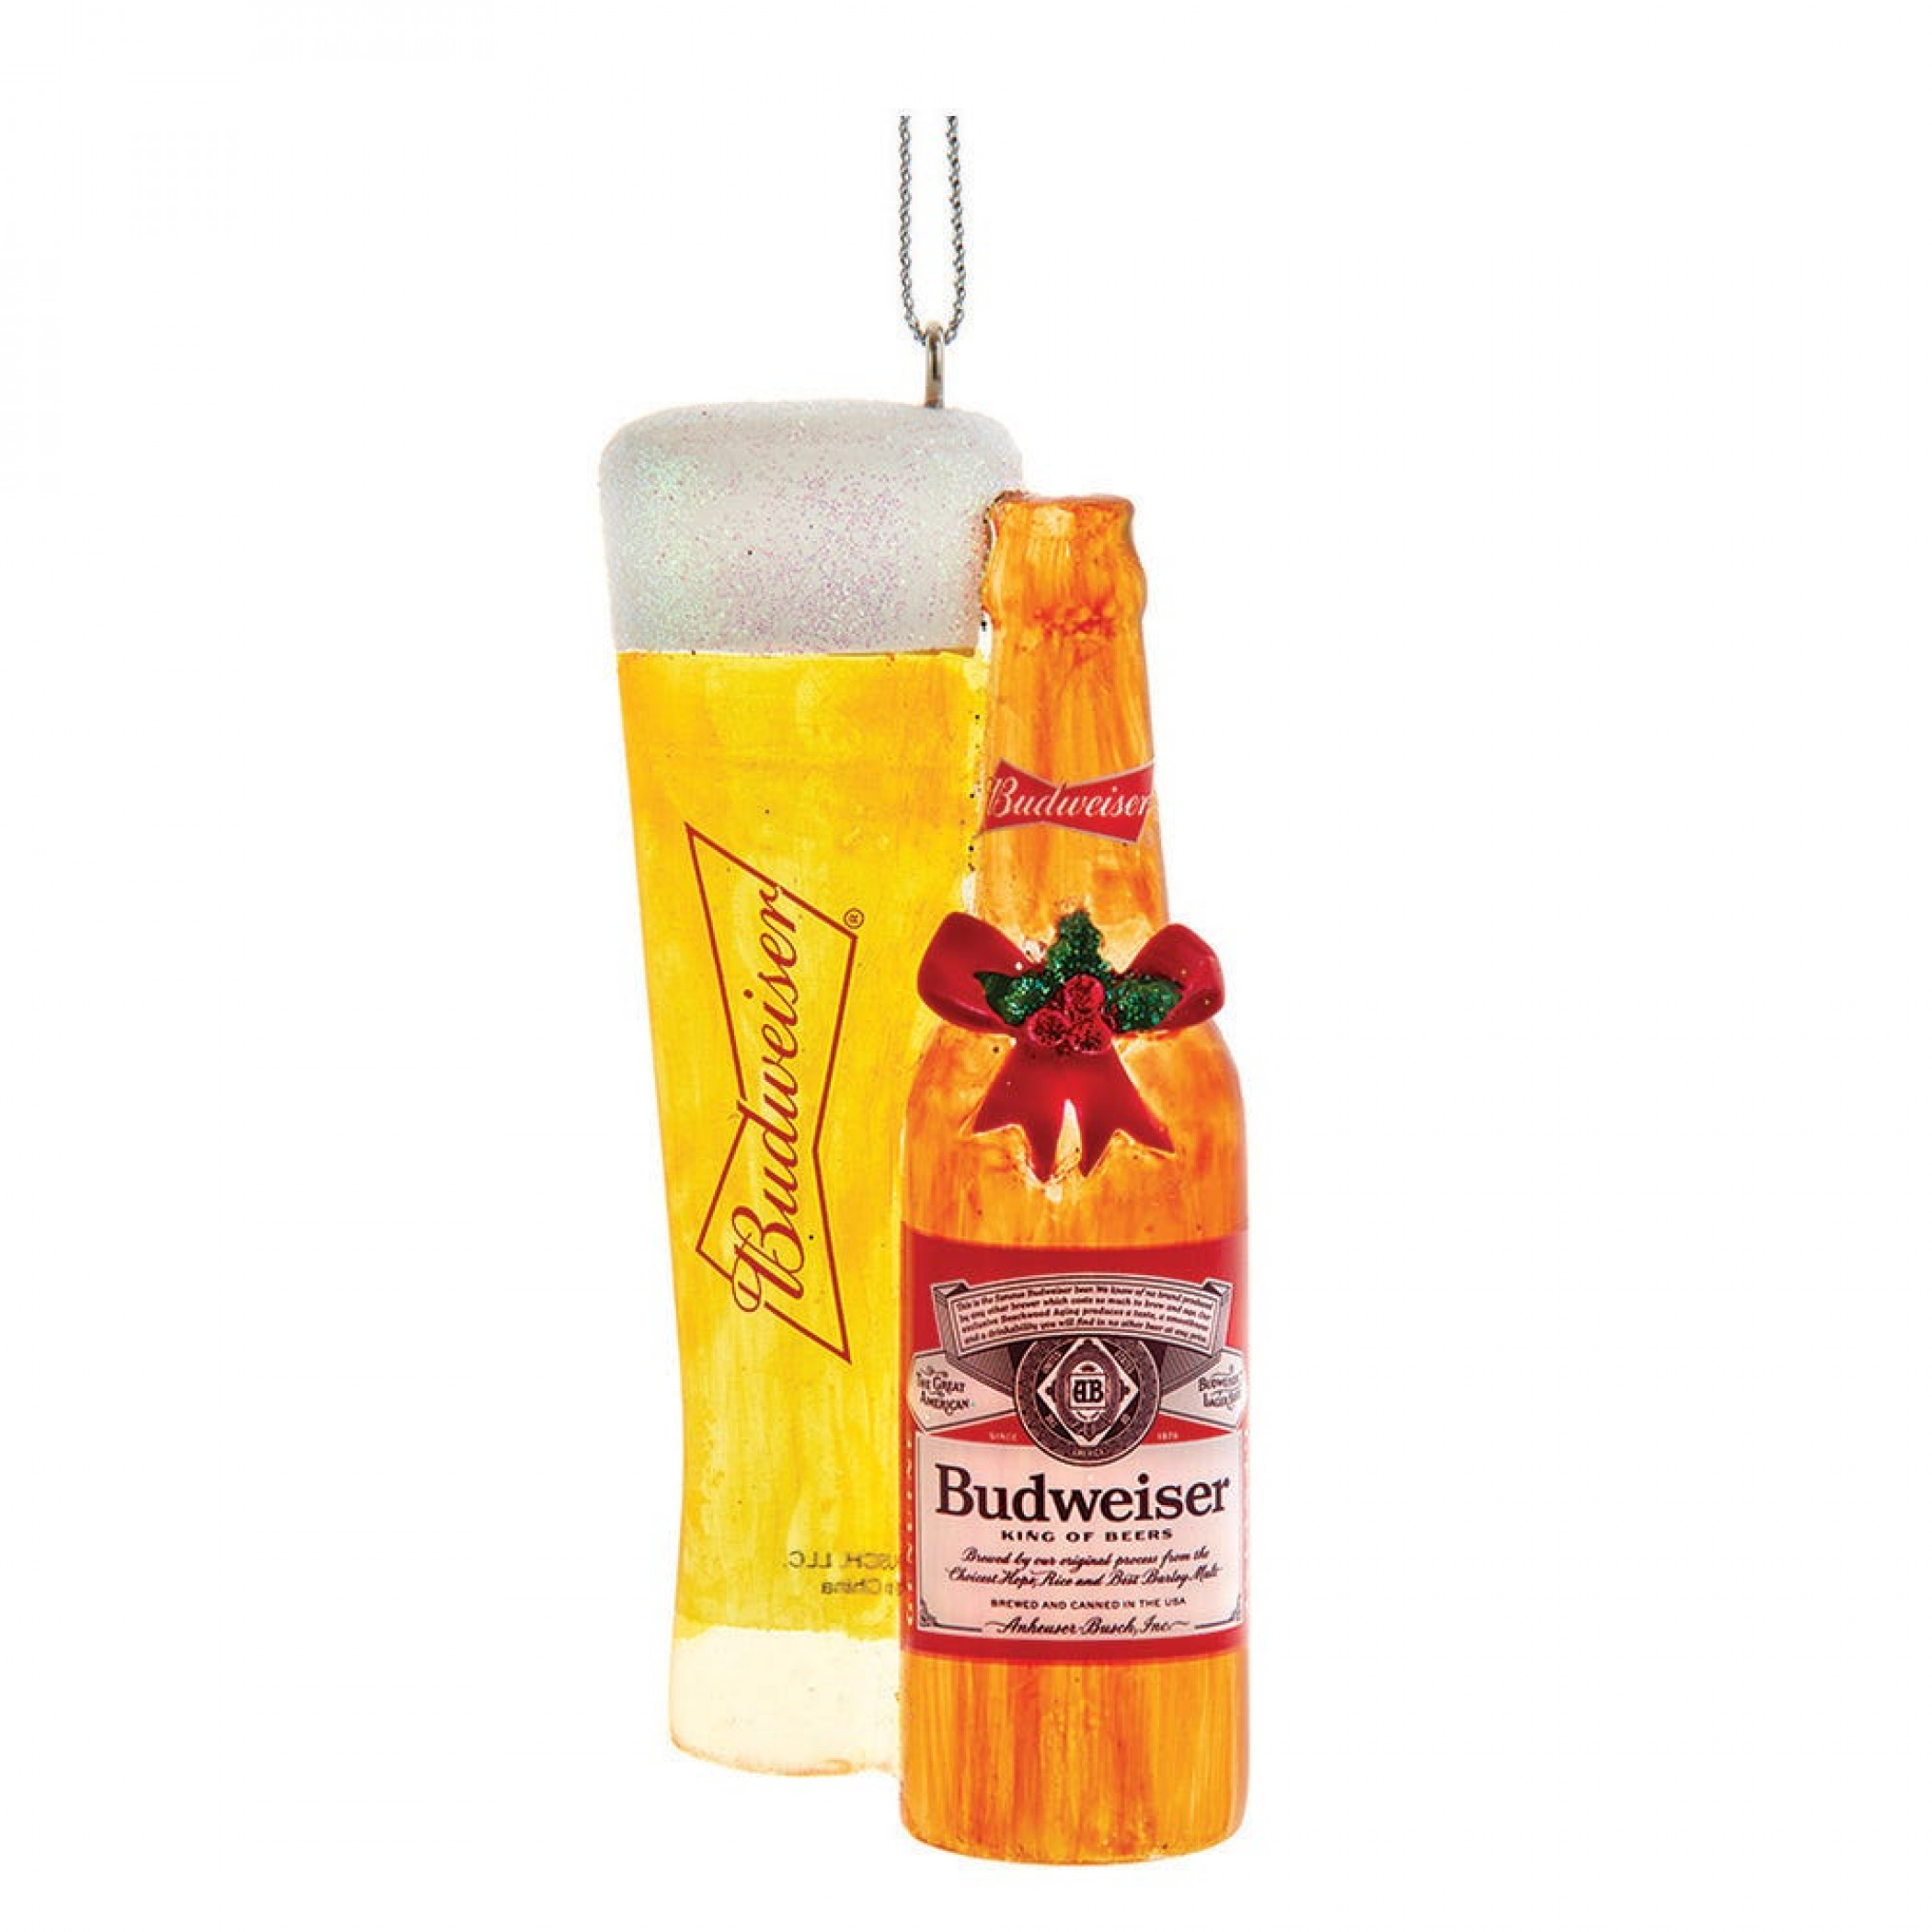 Budweiser Beer Bottle and Glass Holiday Ornament